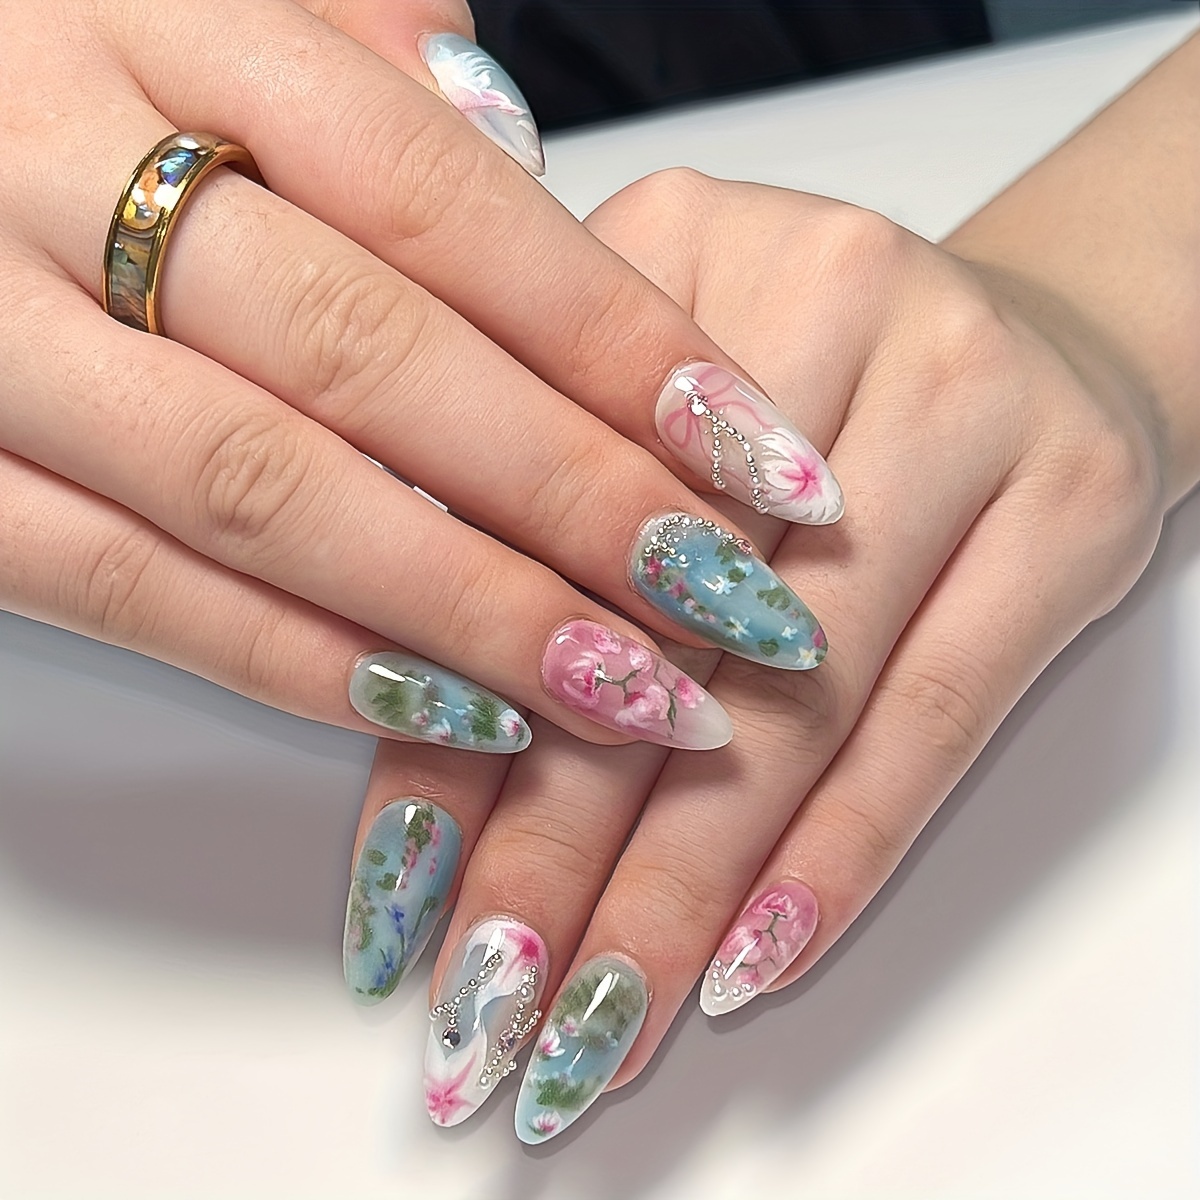 

24-piece Pastel Floral Press-on Nails Kit - Medium Almond Shape, Glossy Finish With Jelly Adhesive & Nail File Included